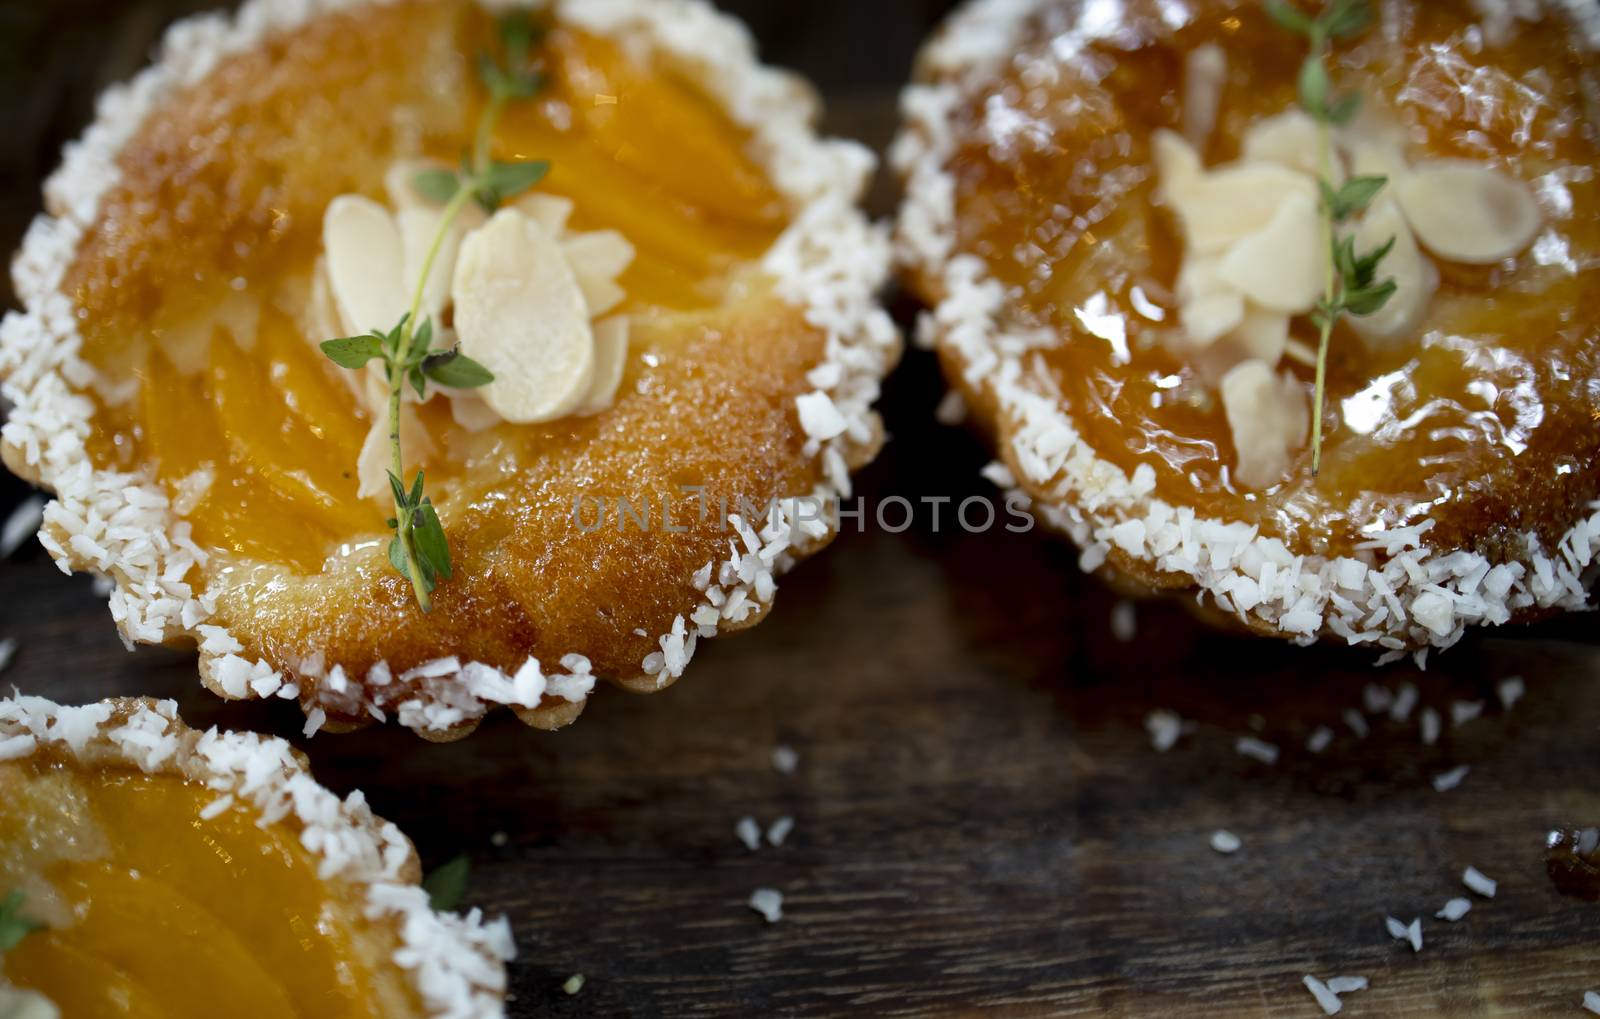 Peach tart with almond slices and coconut flakes.